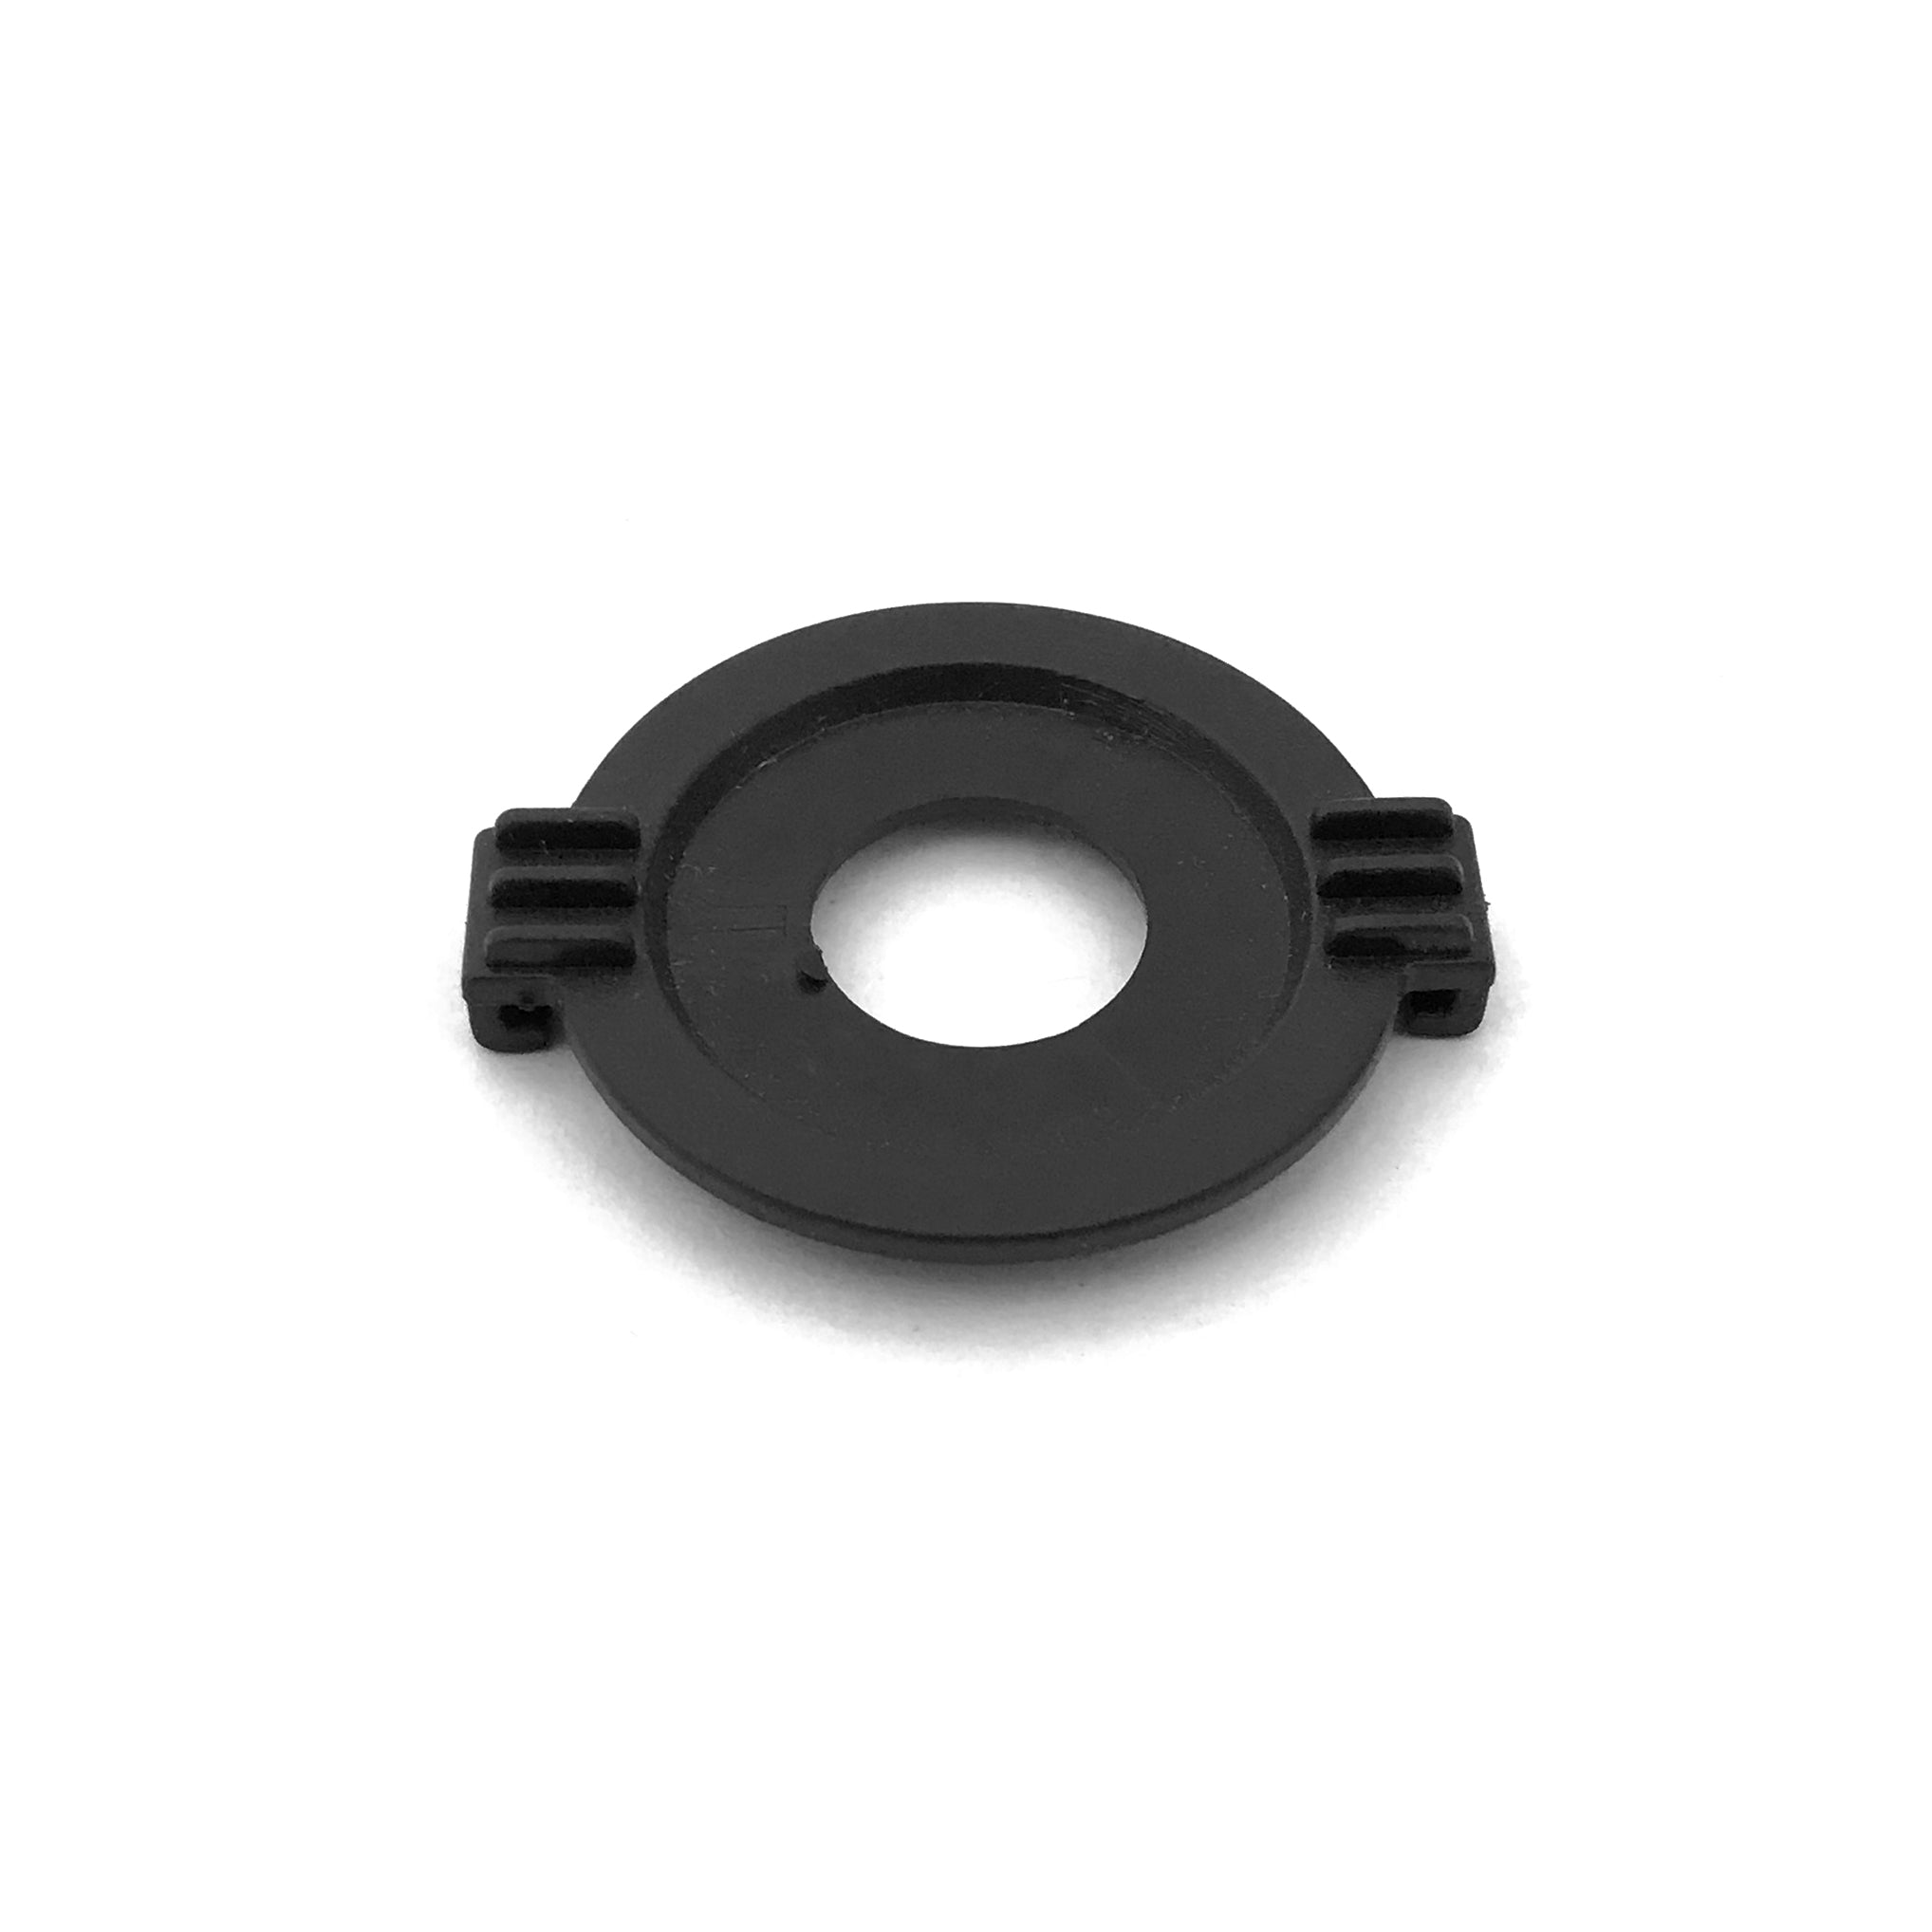 REPLACEMENT IMPELLER COVER & SEAL FOR SP-120